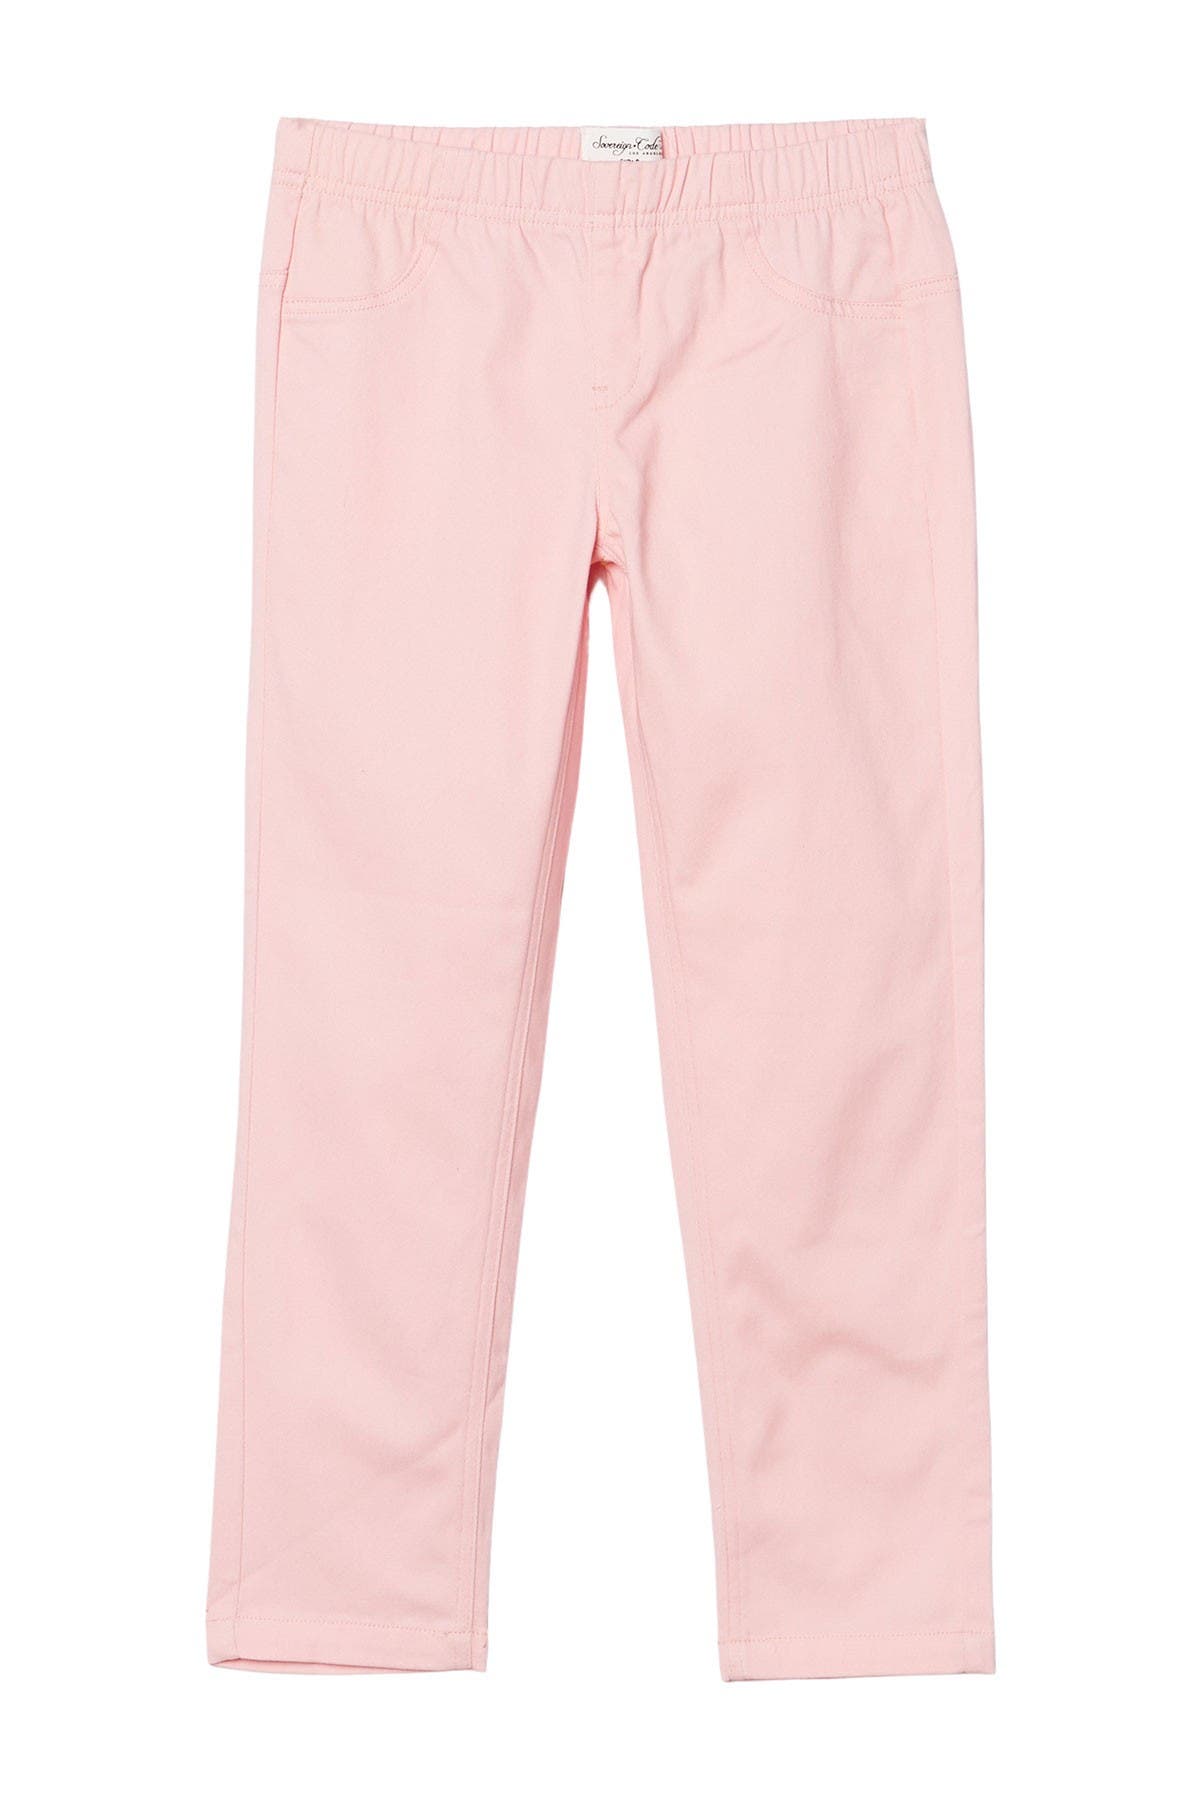 Sovereign Code Kids' Barina Knit Pull-on Pants In Light/pastel Pink